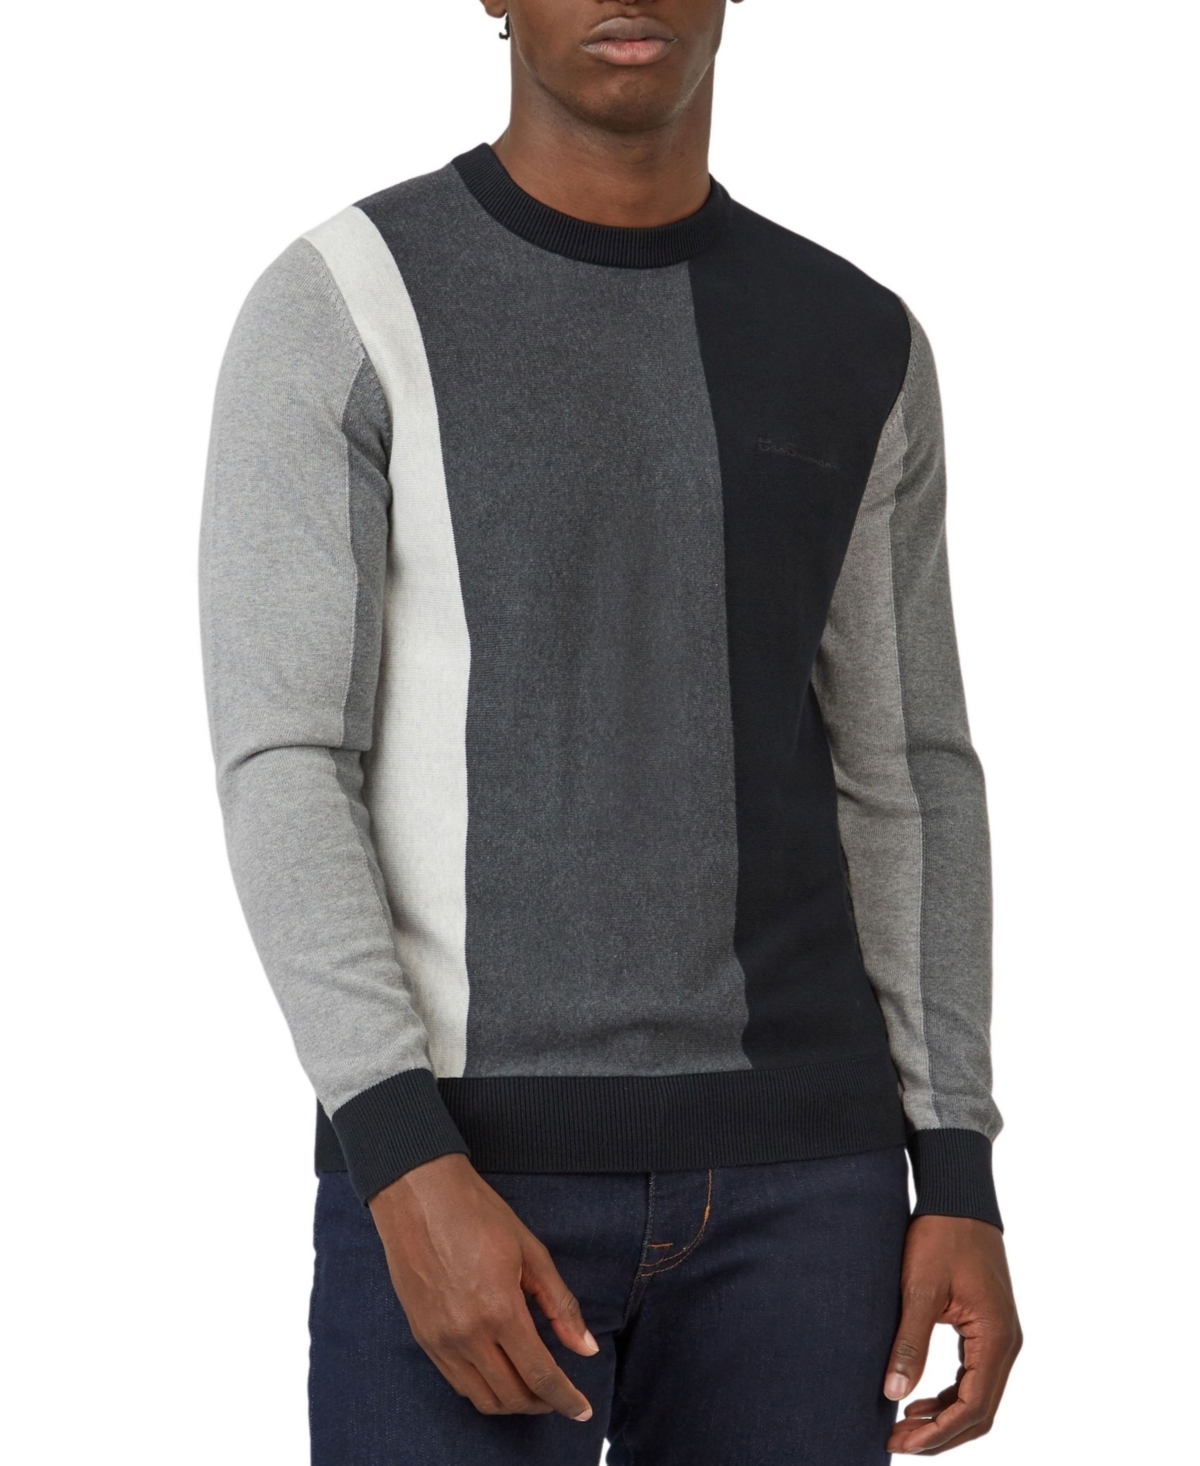 Men's Knitted Vertically-Striped Long-Sleeve Crewneck Sweater - Black